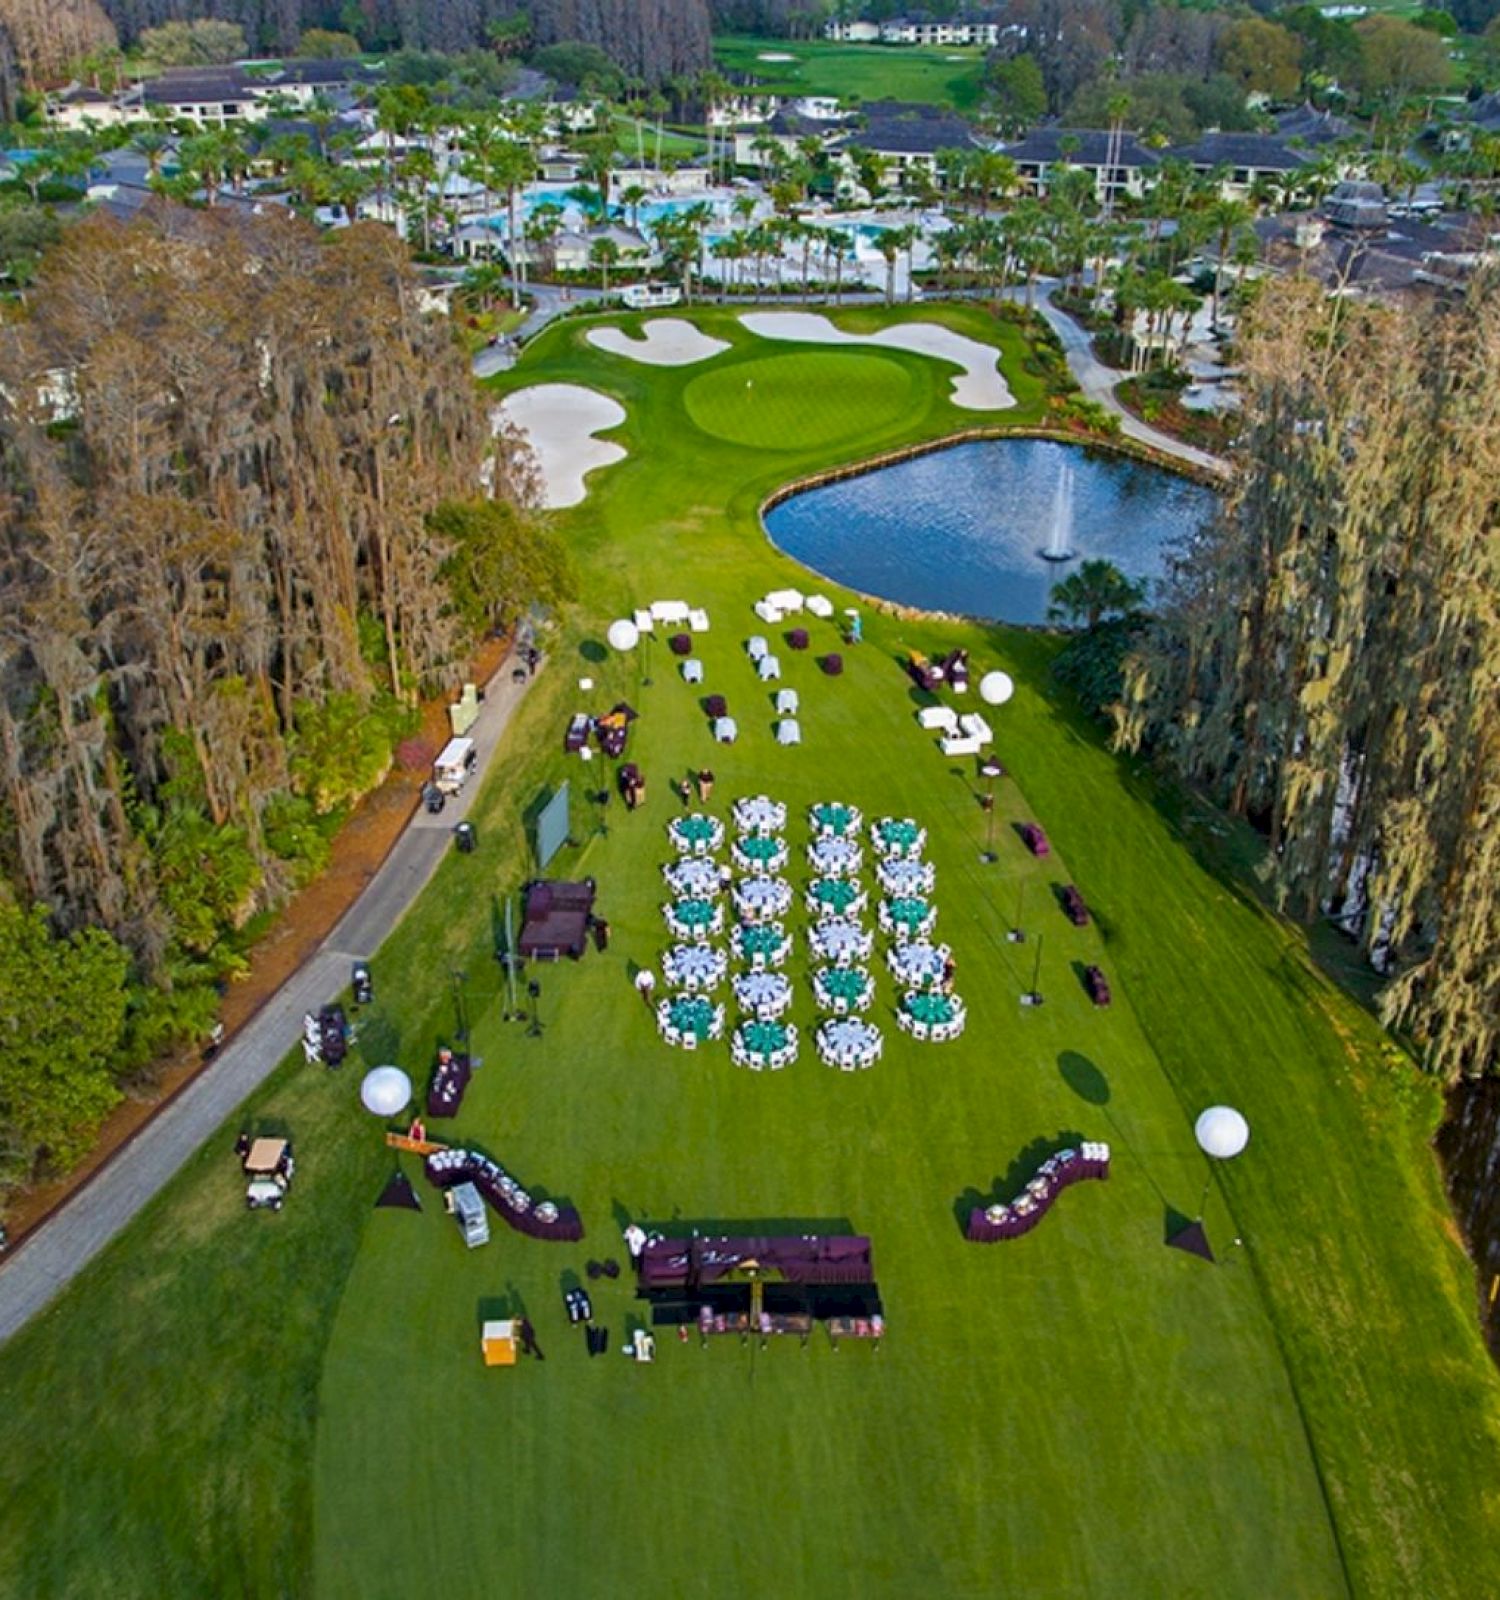 An aerial view shows an event setup on a golf course with tables and chairs, alongside a pond and surrounded by lush greenery and trees.